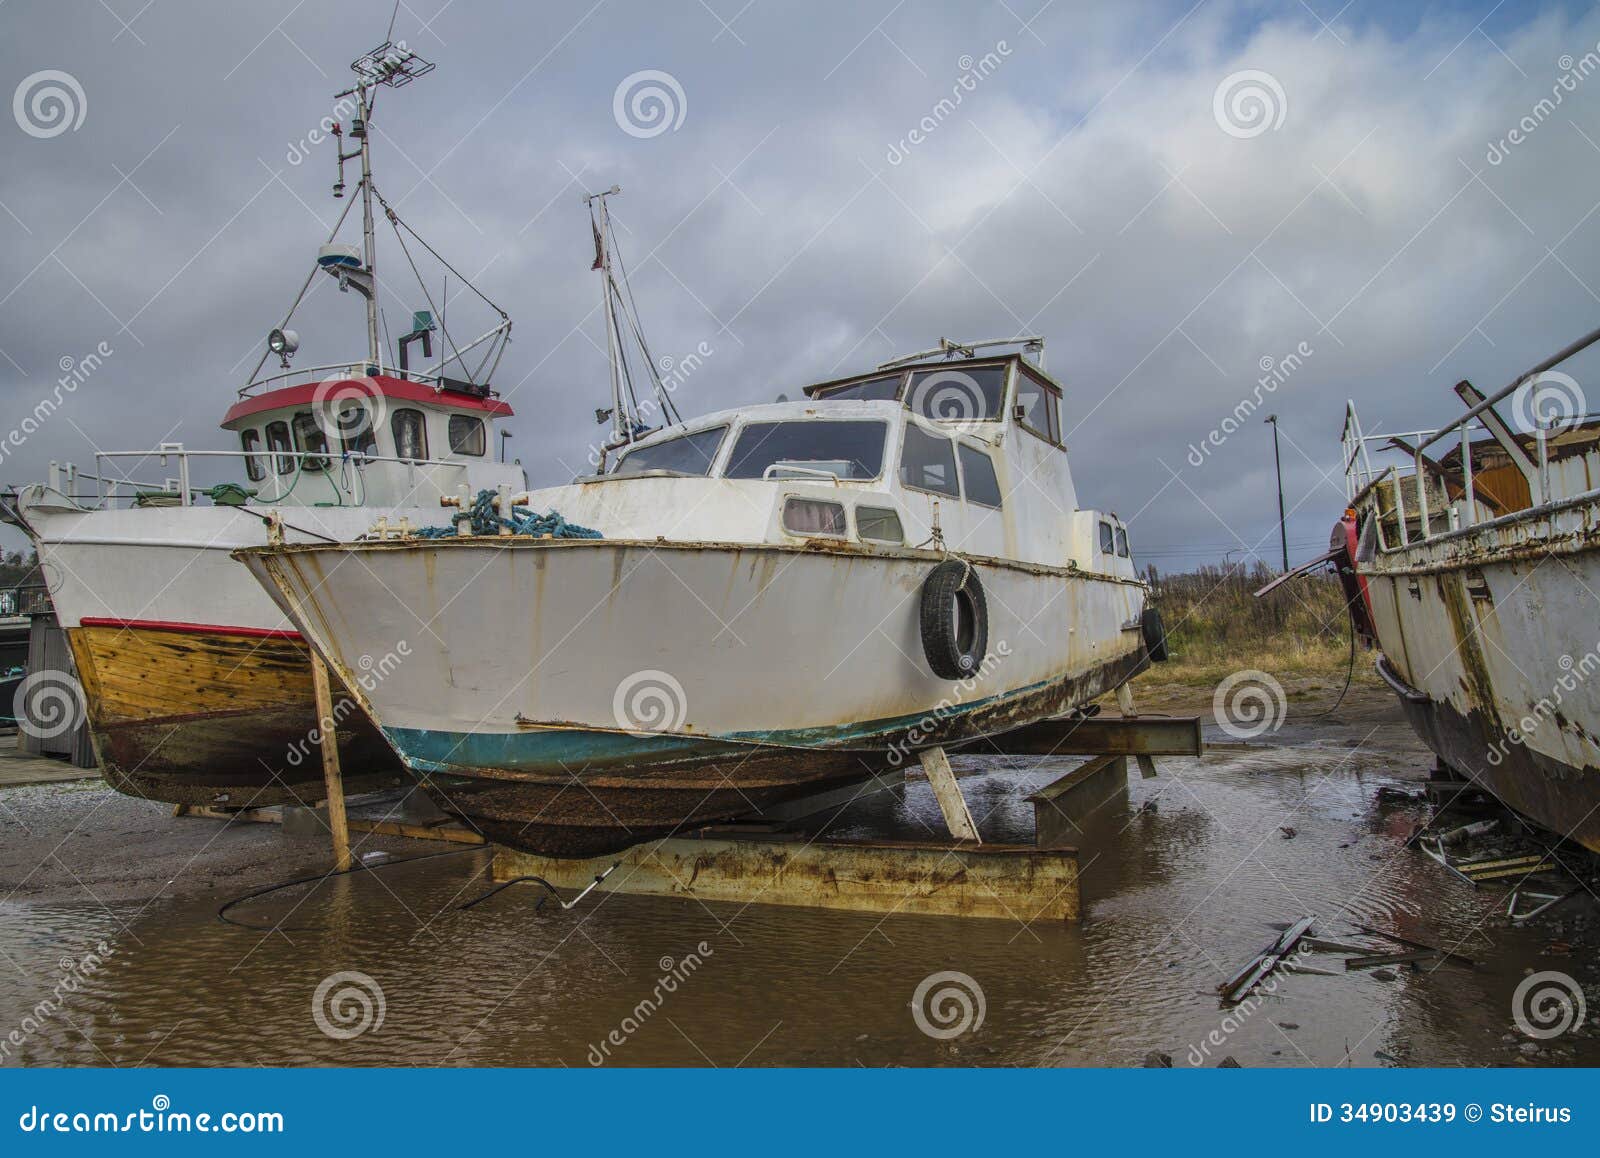 Big Old Rusty Steel Boat Royalty Free Stock Images - Image: 34903439